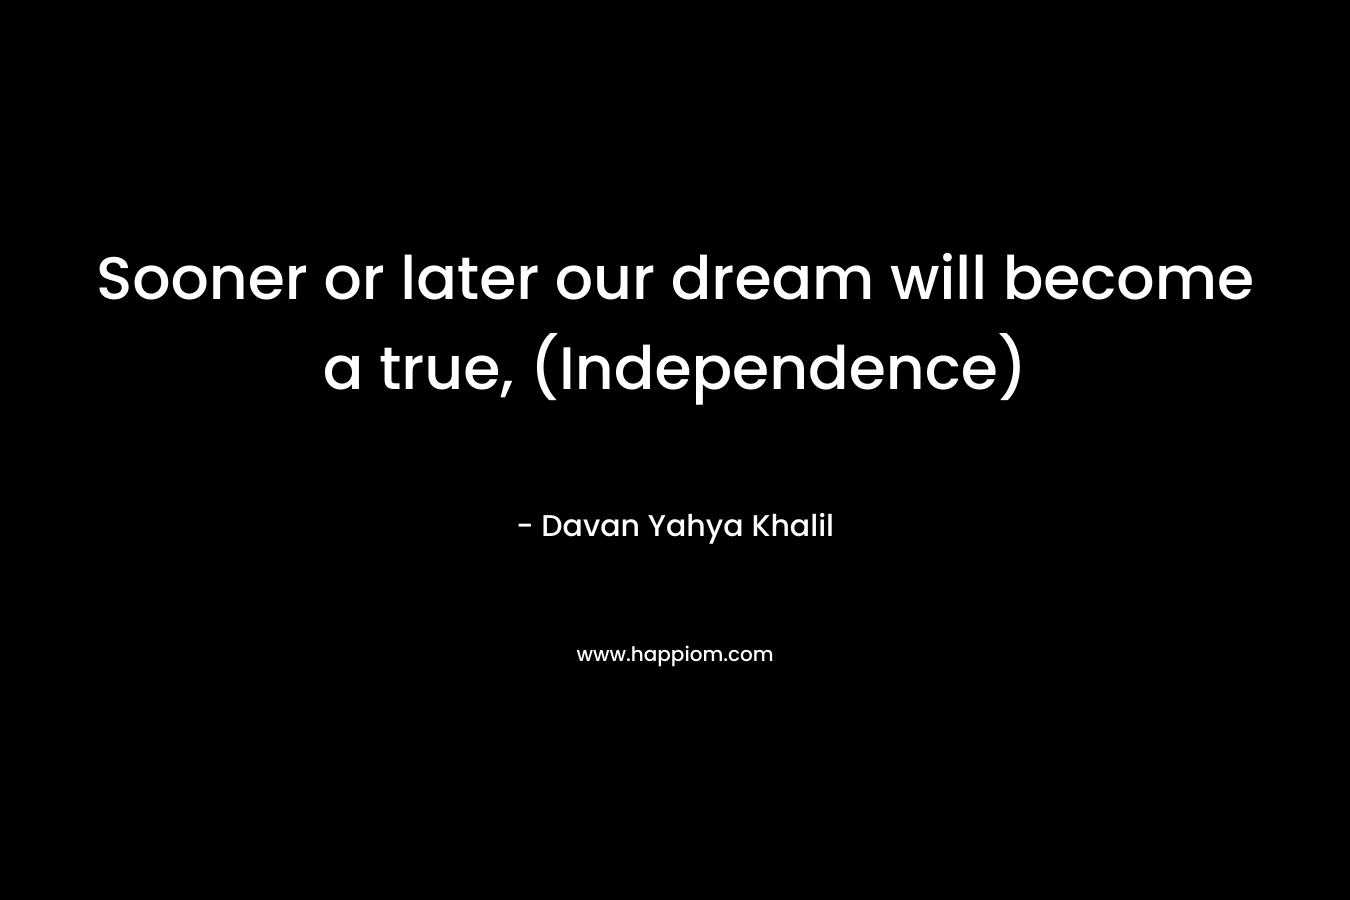 Sooner or later our dream will become a true, (Independence) – Davan Yahya Khalil